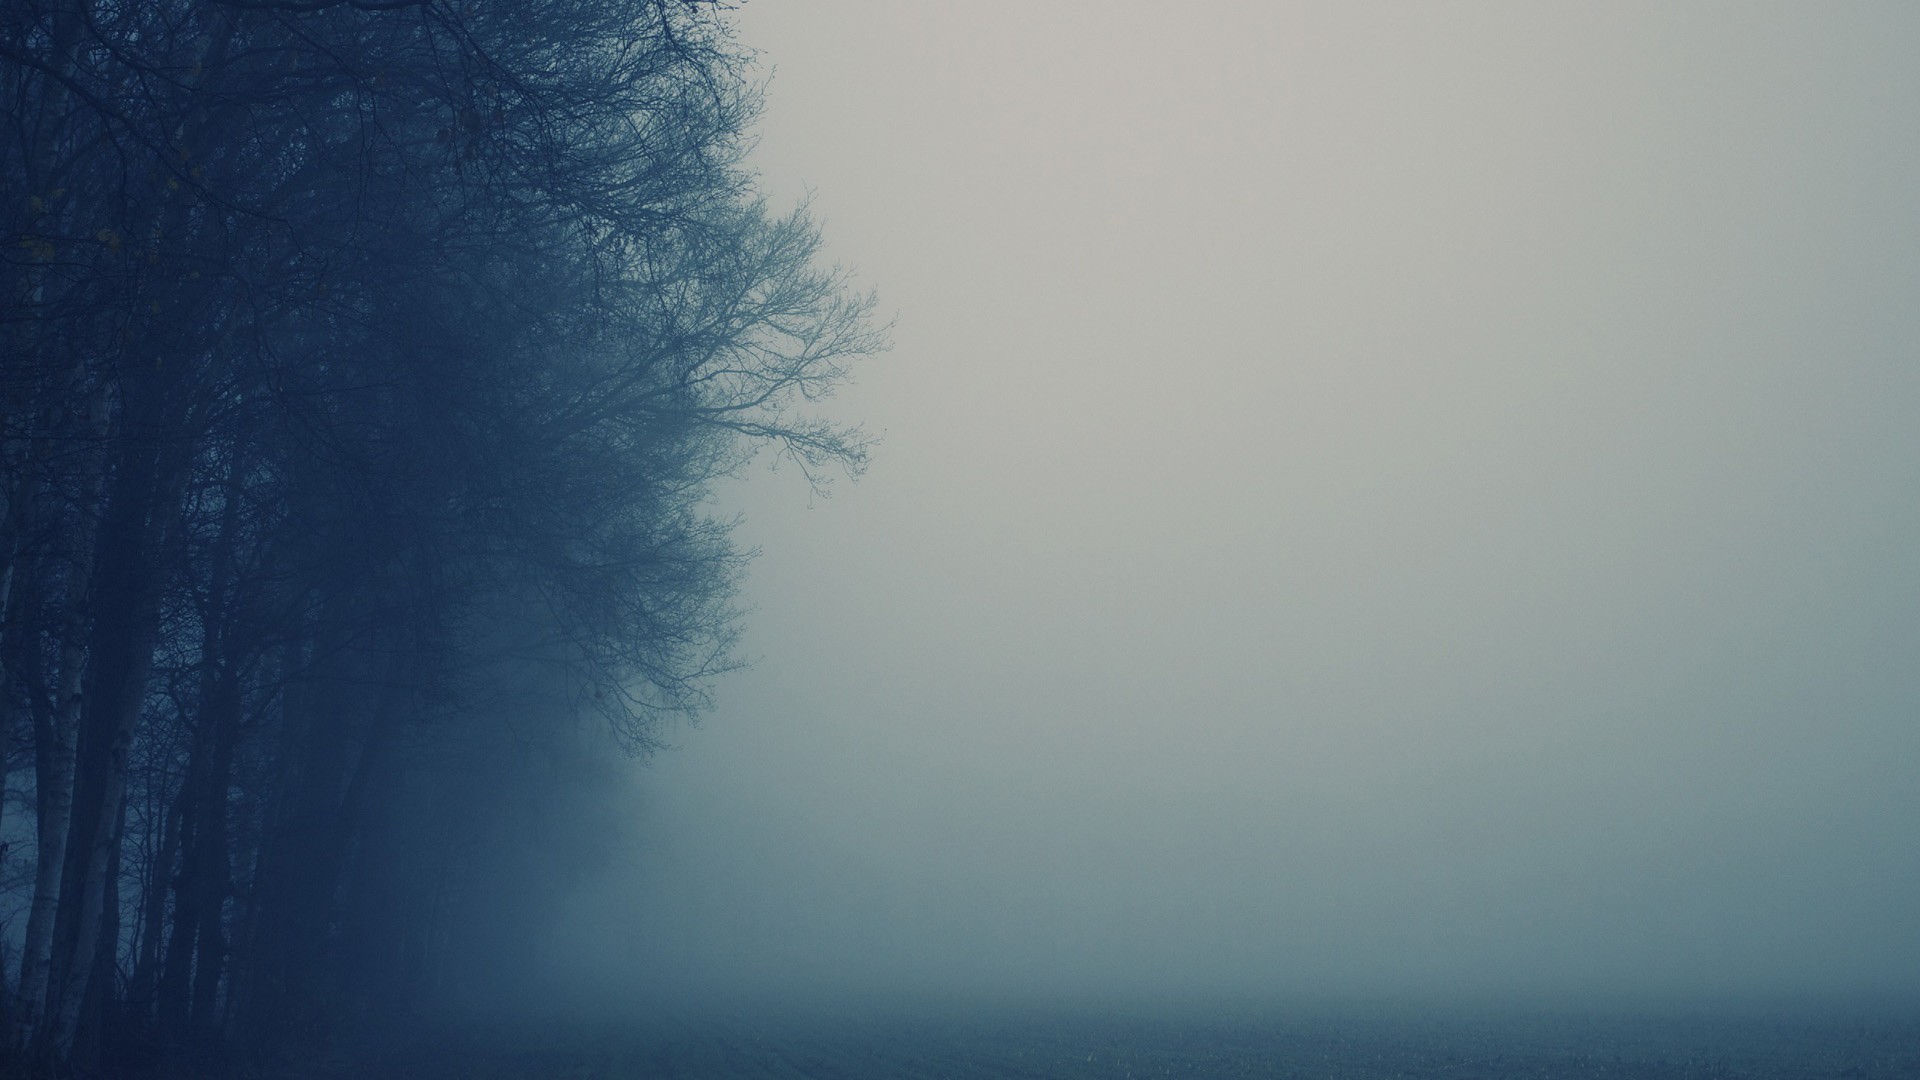 General 1920x1080 mist trees field outdoors photography